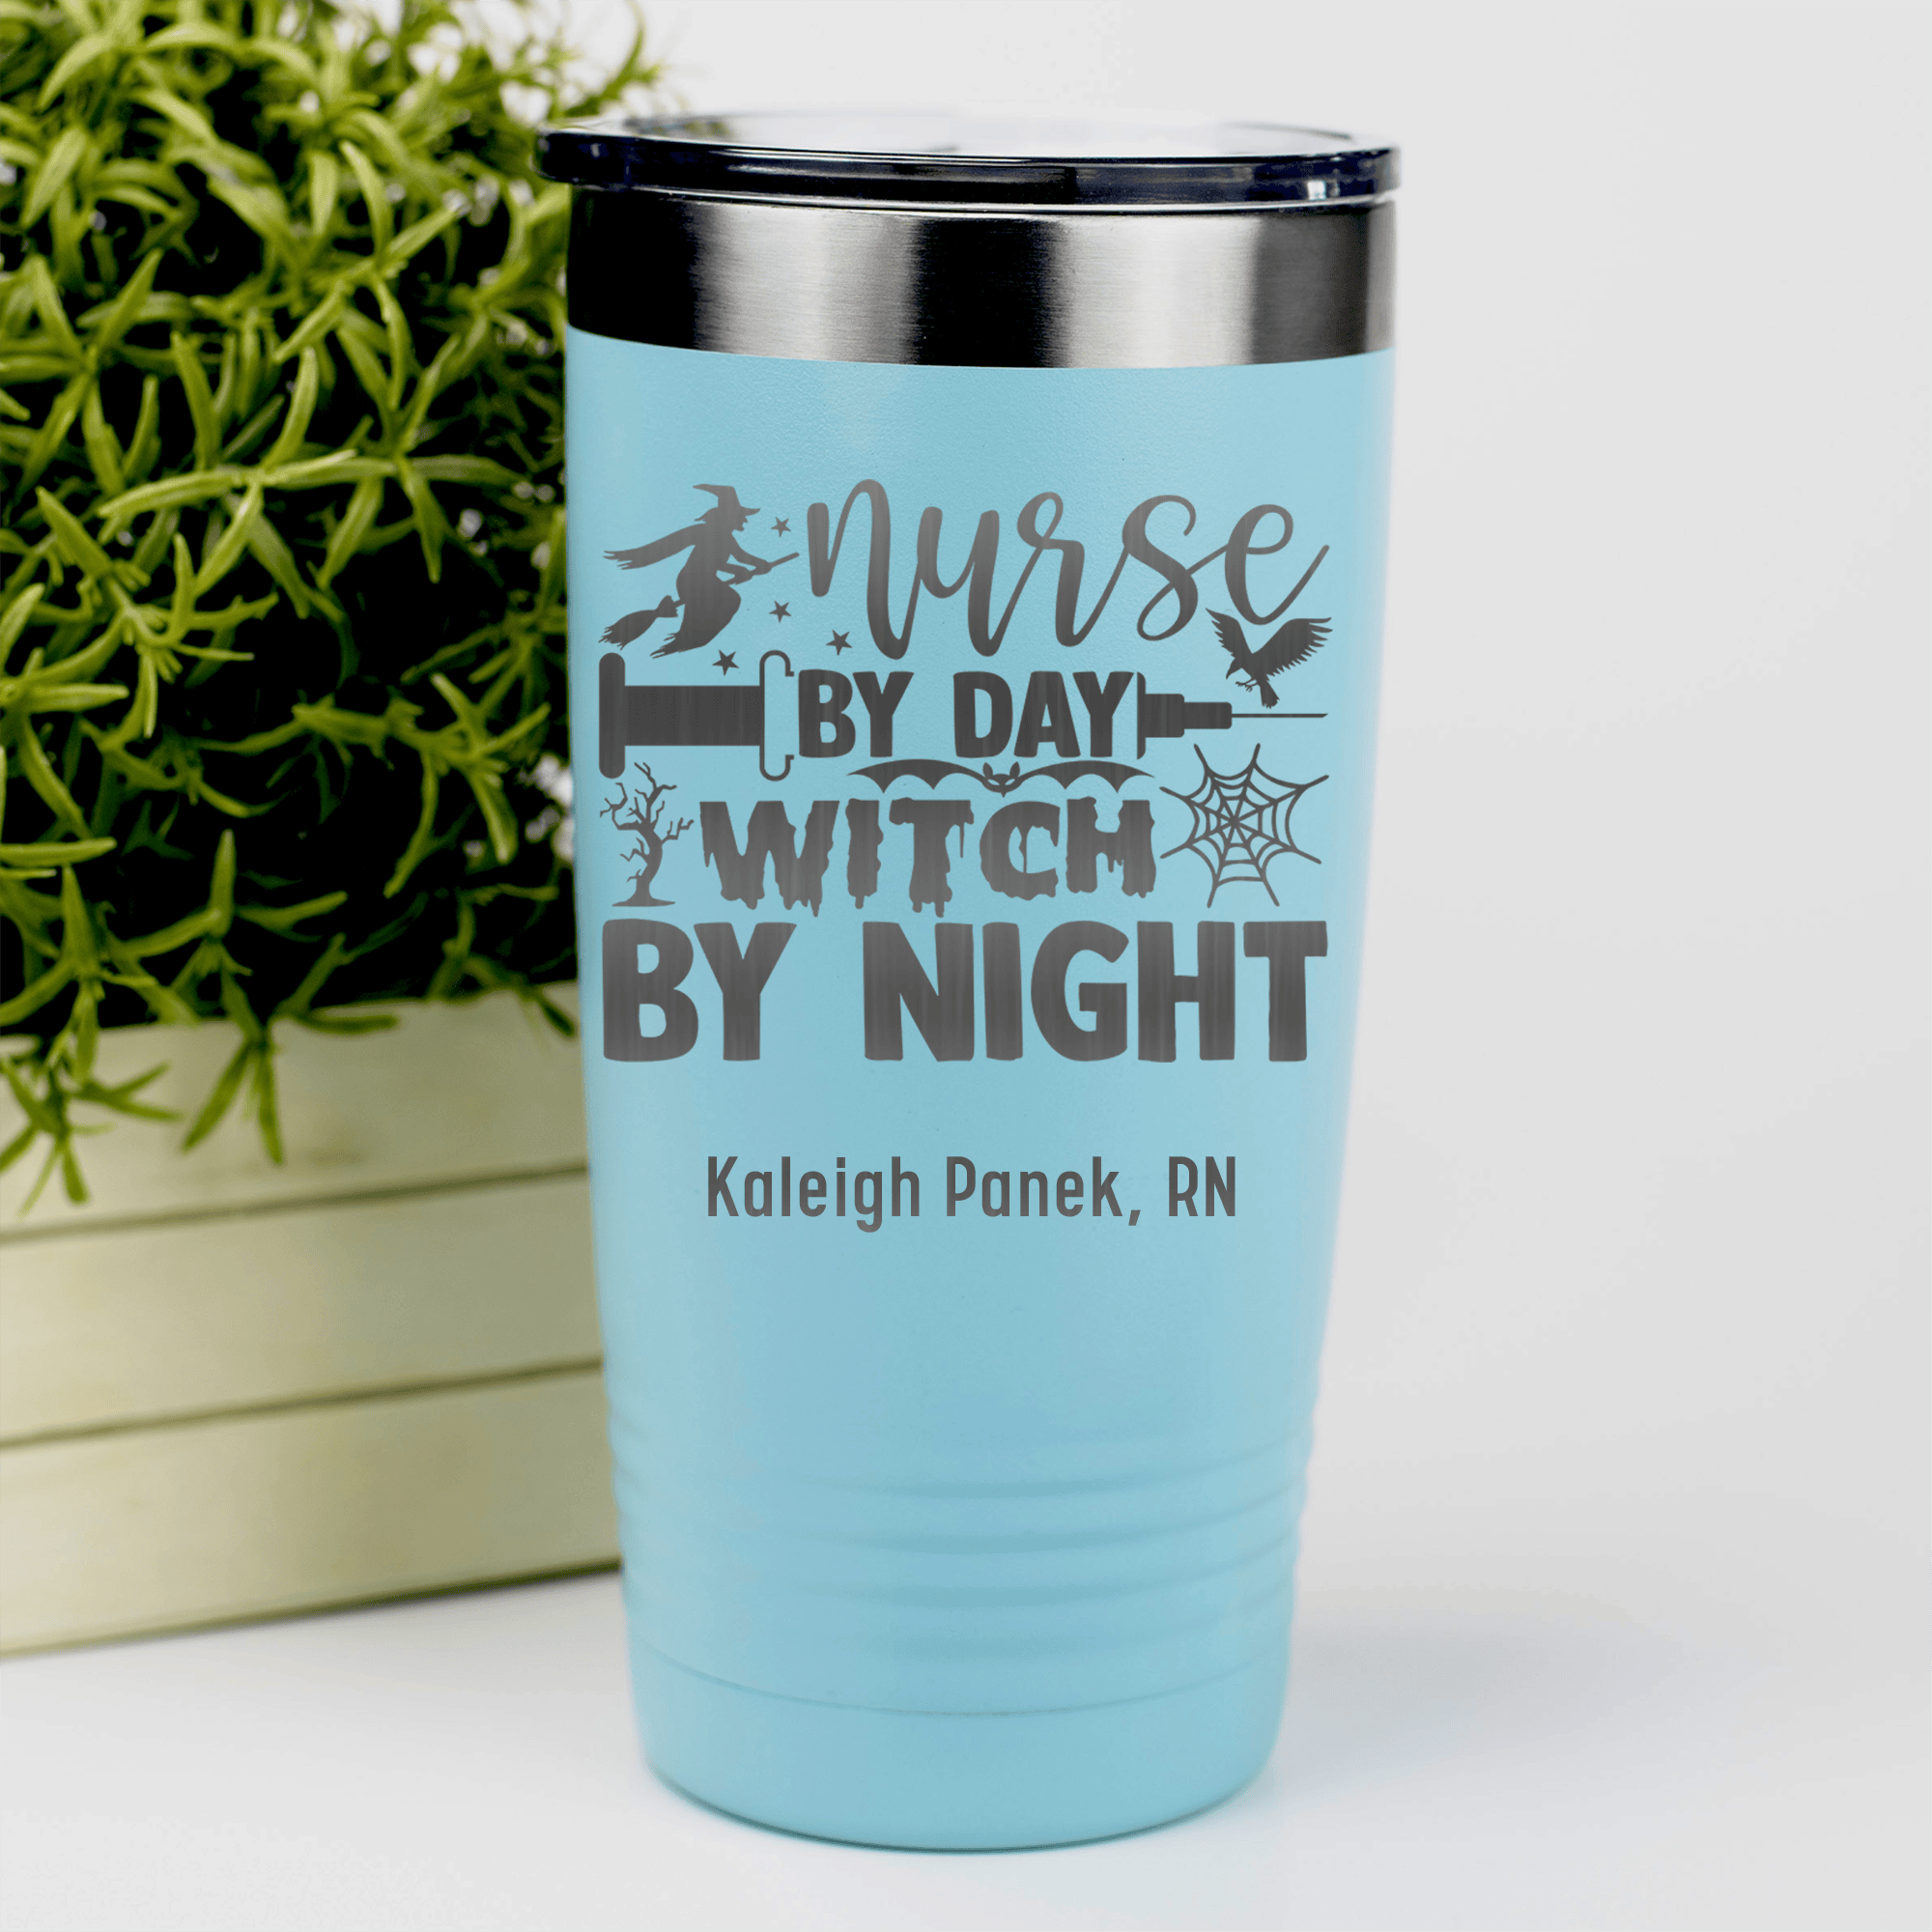 Teal Nurse Tumbler With Nurse By Day Witch By Night Design